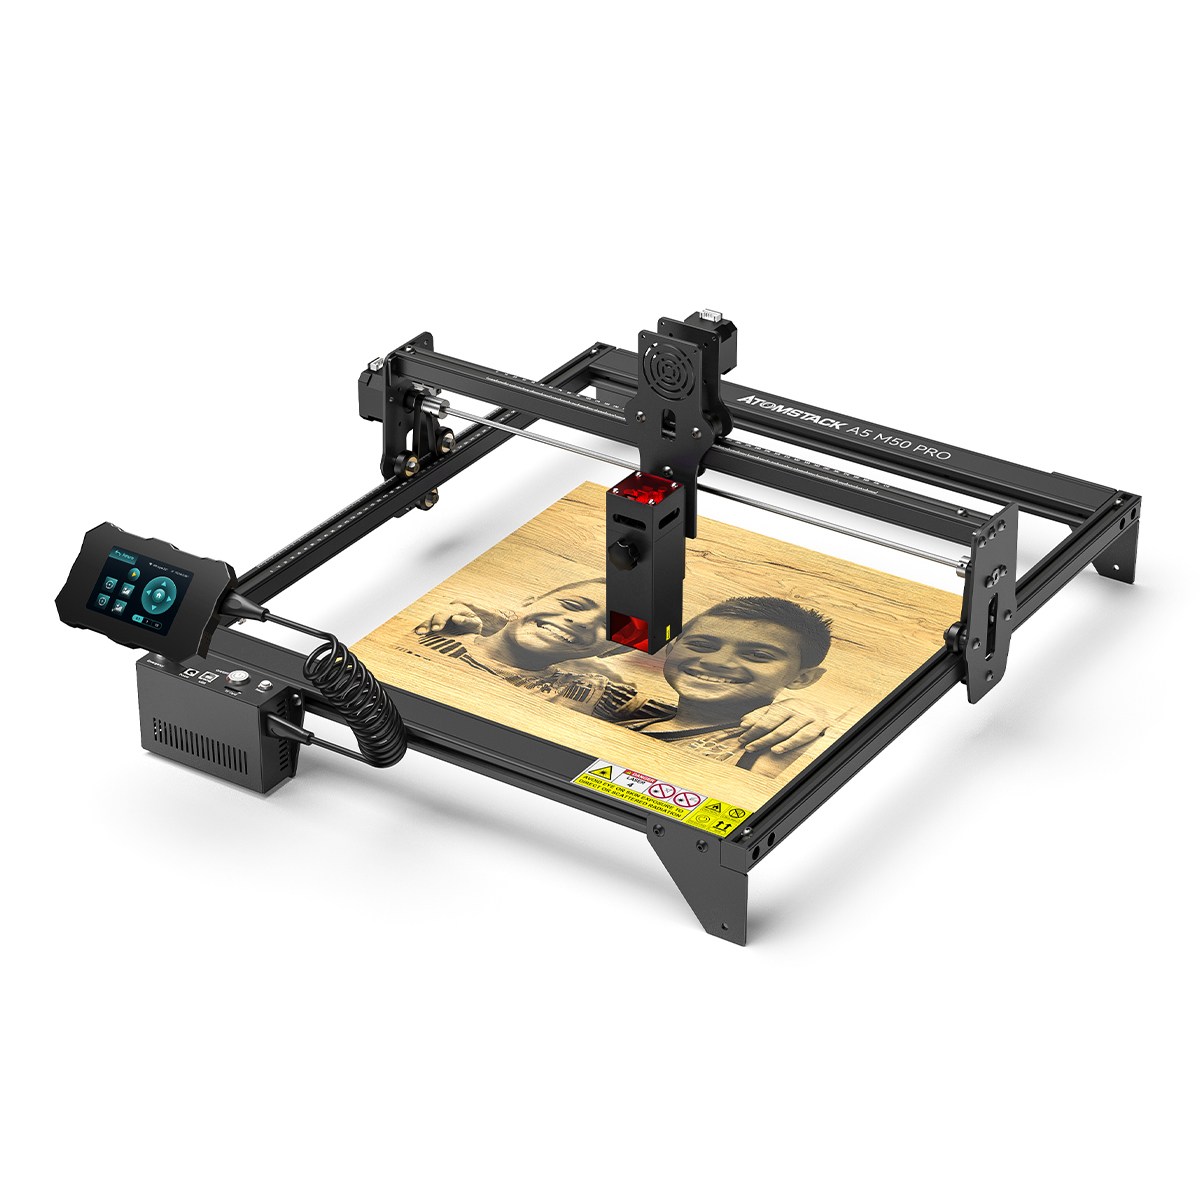 Find ATOMSTACK A5 M50 PRO Dual Laser Laser Engraving Cutting Machine Laser Engraver 5 5W Output Power Fixed Focus 304 Mirror Stainless Steel Engraving DIY Laser Marking for Metal Wood Leather Vinyl Support Offline Engraving for Sale on Gipsybee.com with cryptocurrencies